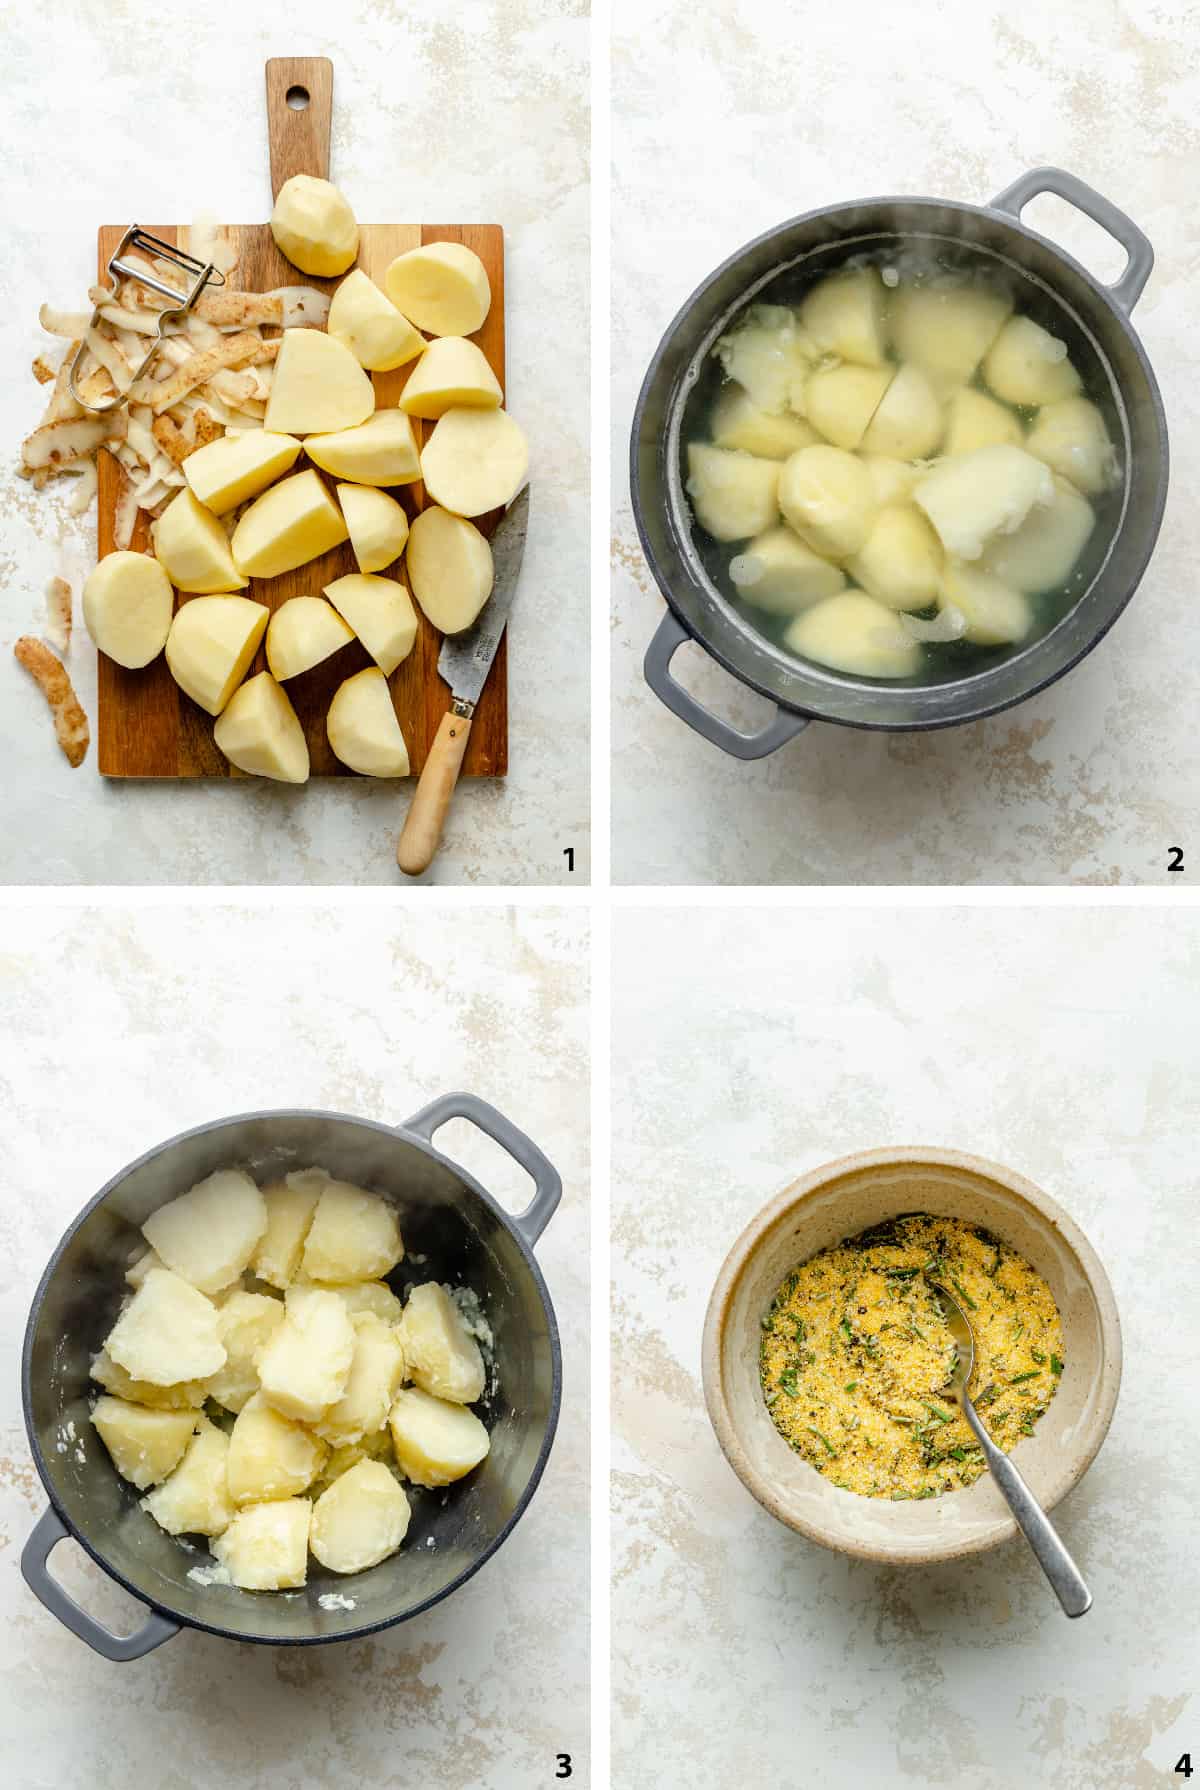 Process steps of preparing the potatoes, parboiling potatoes, drained and roughed up potatoes and the polenta mix. 